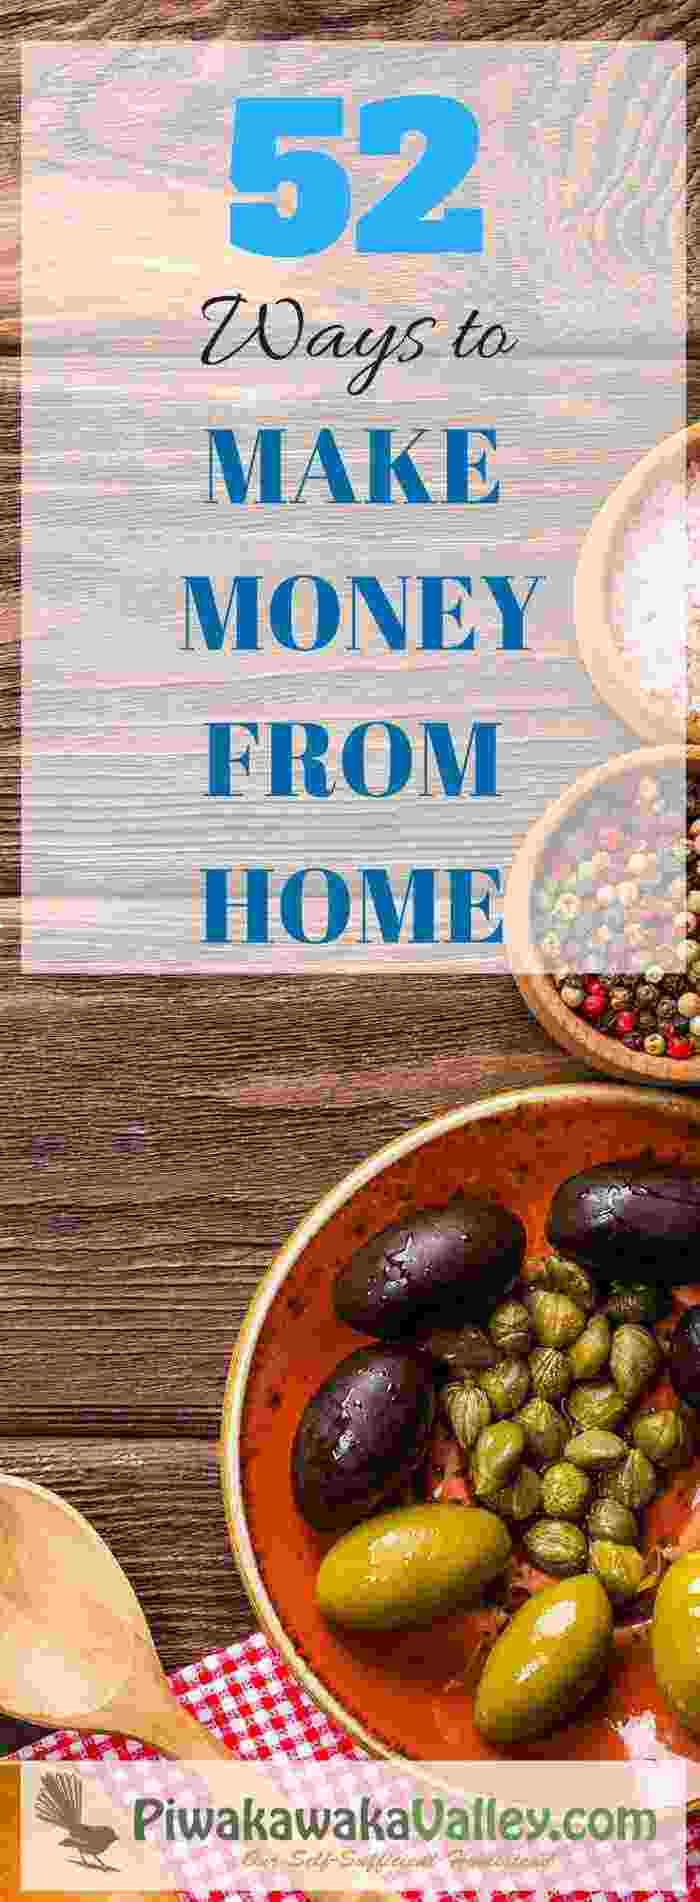 60 Unique Ways To Make Money Homesteading 2019 Making A - 